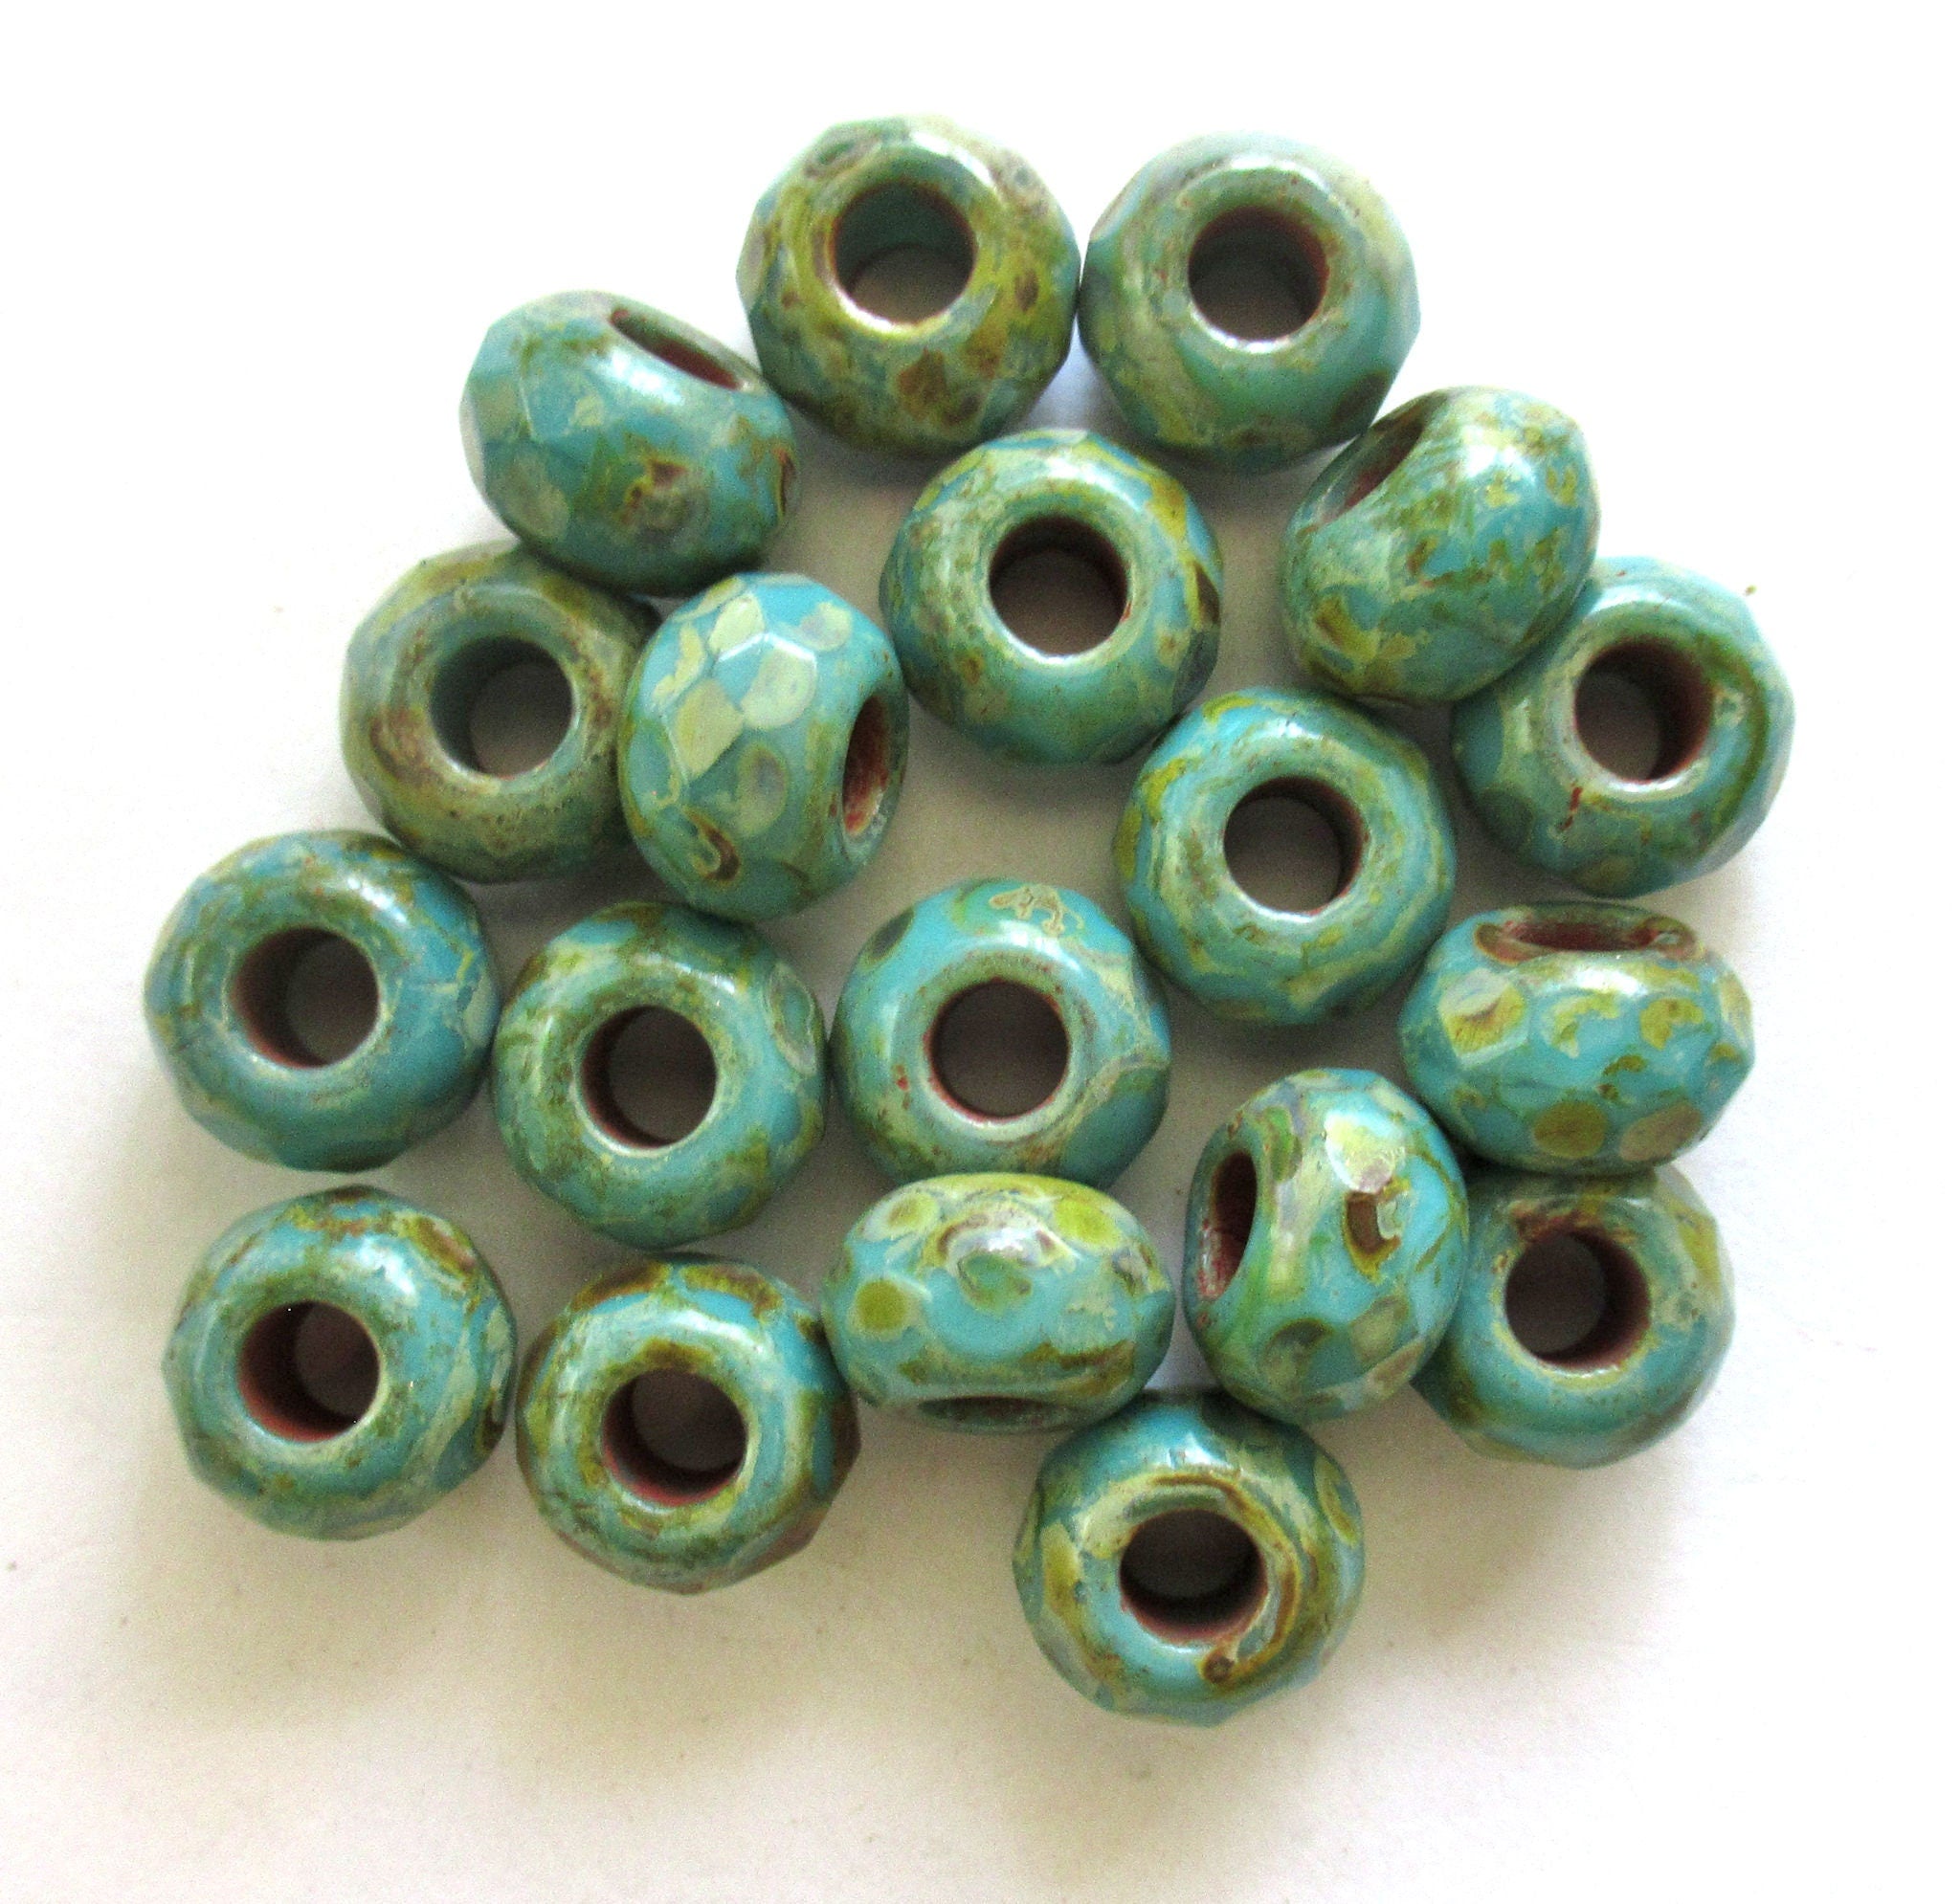 Large Hole Beads Picasso Beads Czech Glass Beads Rondelle Beads